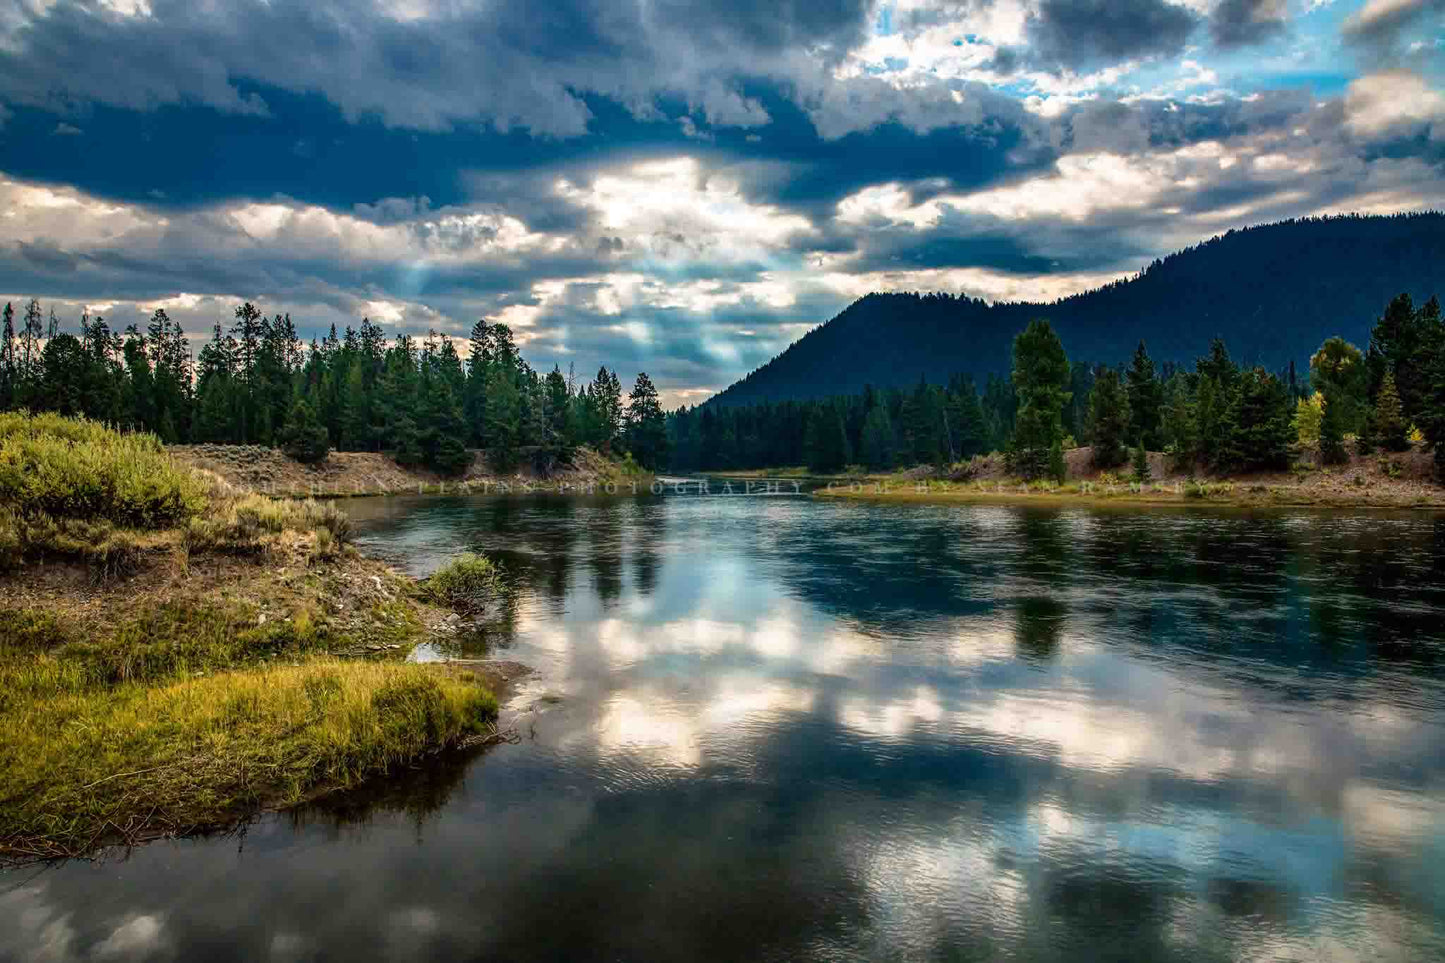 Rocky Mountain photography print of the Snake River on a peaceful morning in Grand Teton National Park, Wyoming by Sean Ramsey of Southern Plains Photography.